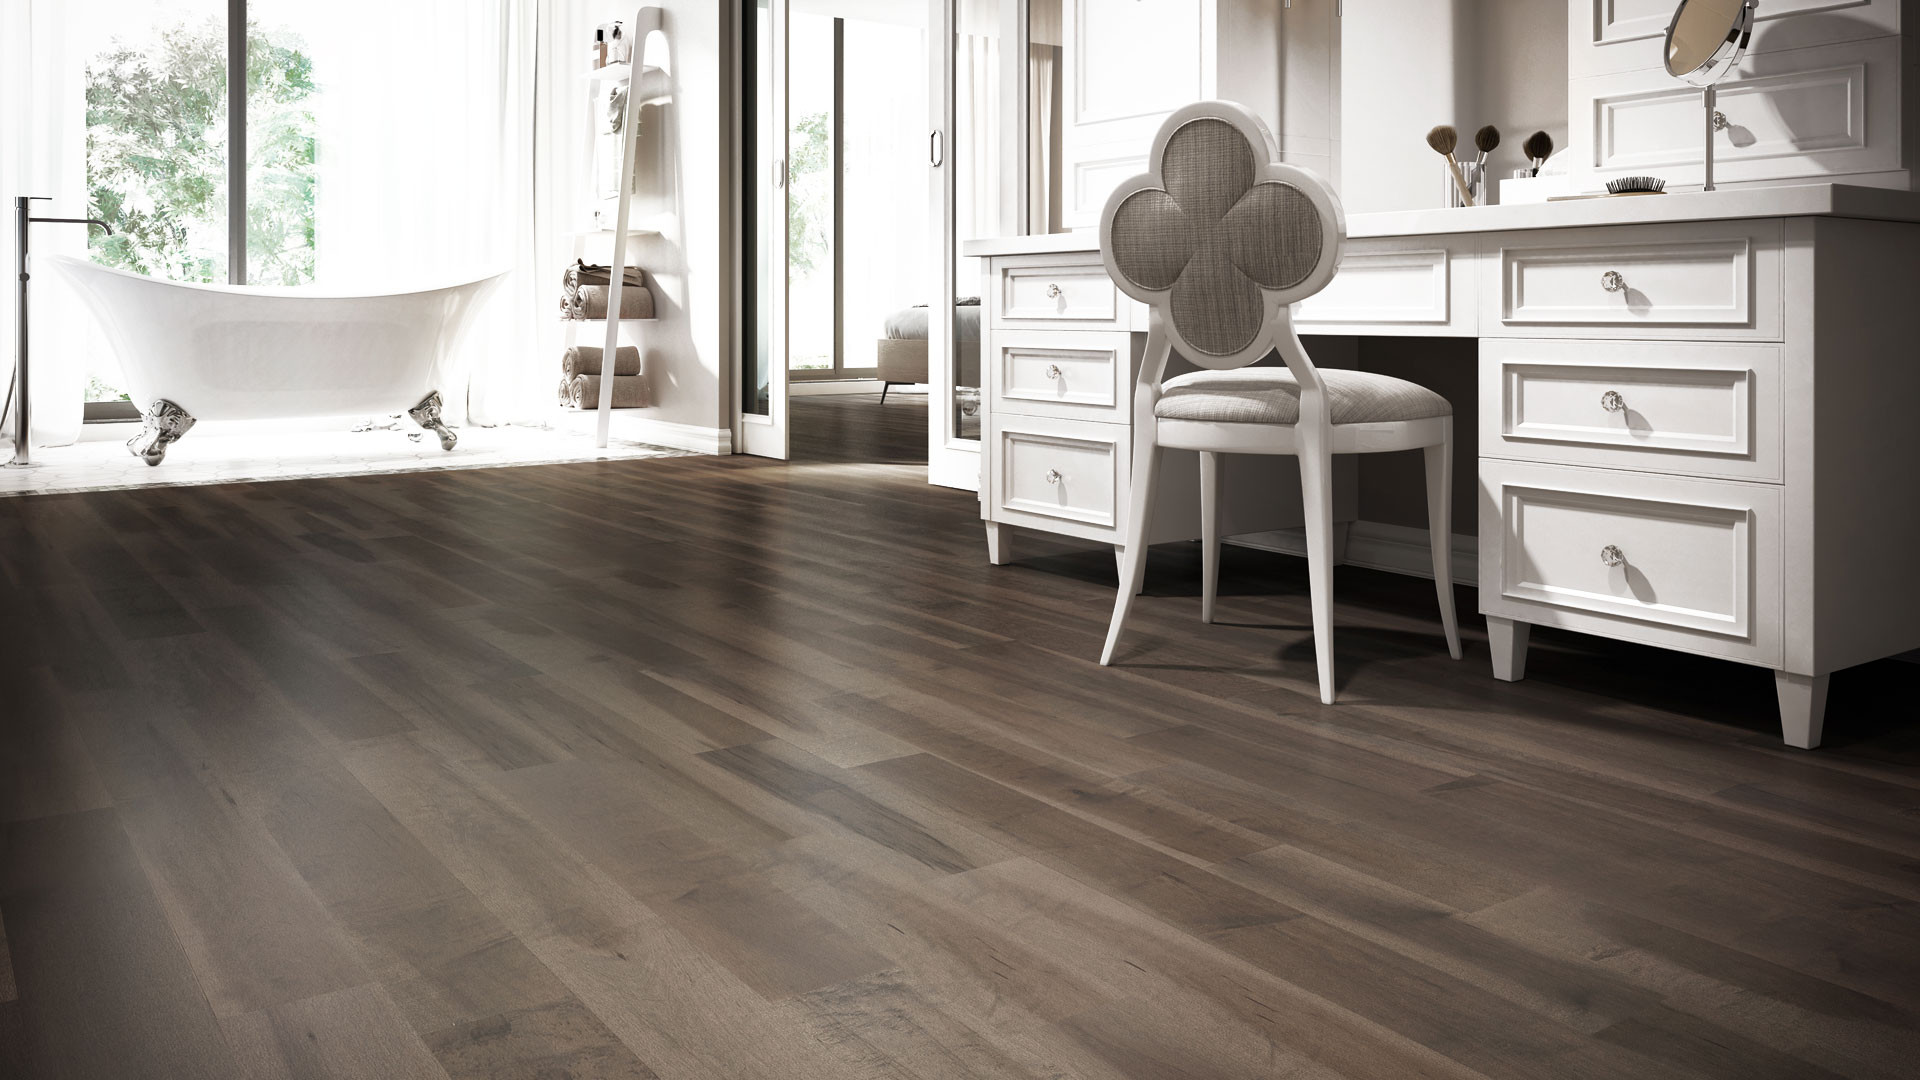 29 Awesome Discount Hardwood Flooring Las Vegas 2024 free download discount hardwood flooring las vegas of 4 latest hardwood flooring trends lauzon flooring intended for learn more about our pure genius by reading our blog post the smartest hardwood floorin